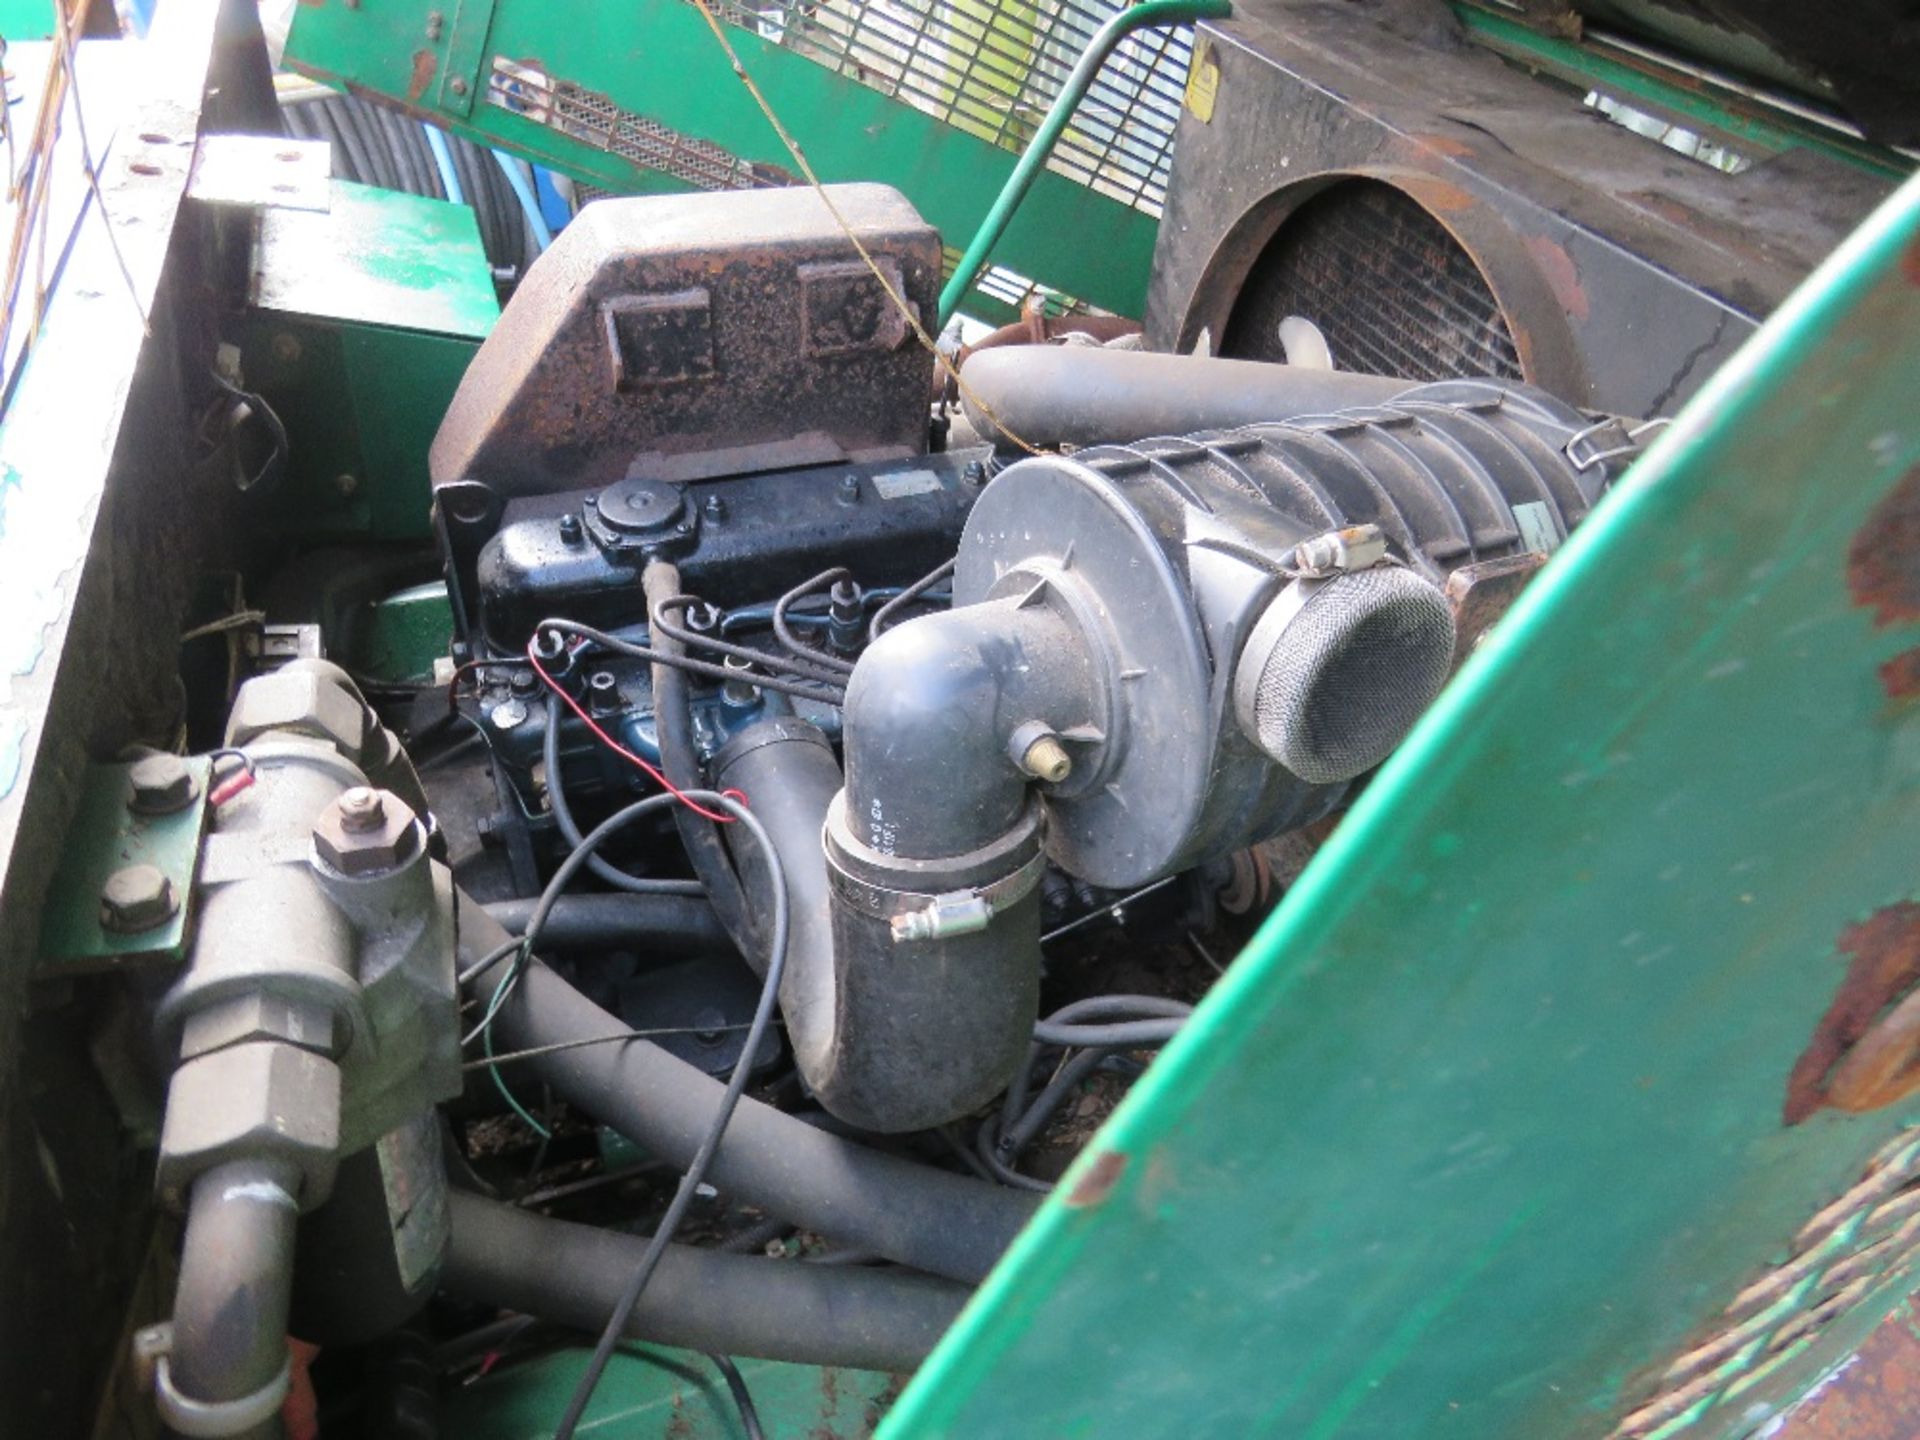 RANSOMES 520 5 GANG RIDE ON CYLINDER MOWER WITH KUBOTA ENGINE. WHEN TESTED WAS SEEN TO RUN, DRIVE, - Image 9 of 12